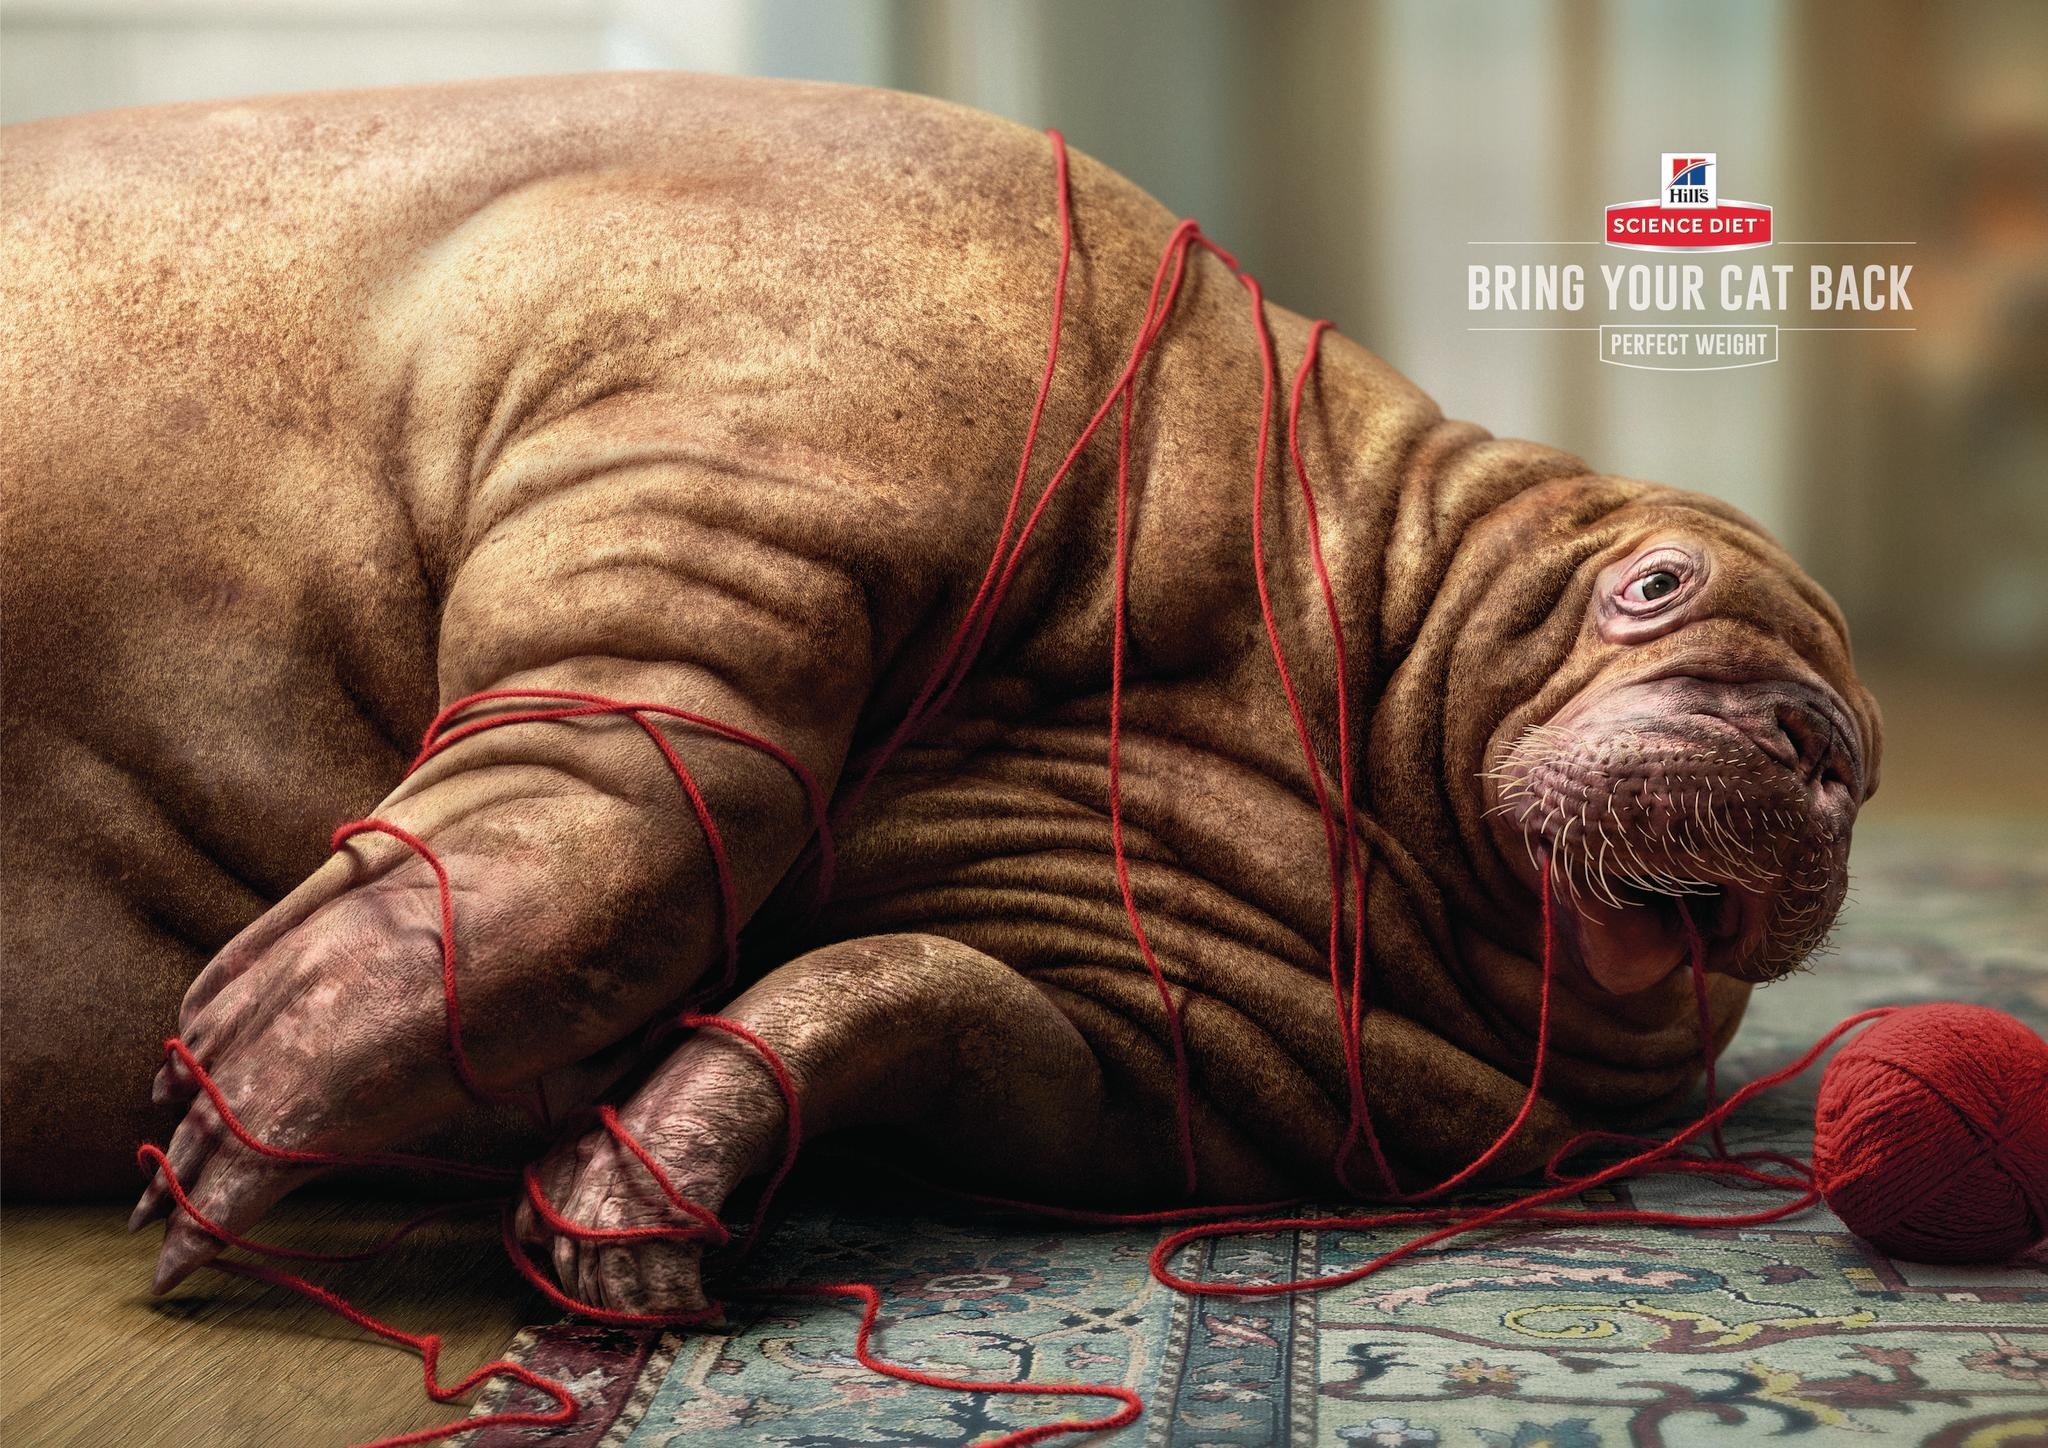 BRING YOUR PET BACK - WALRUS